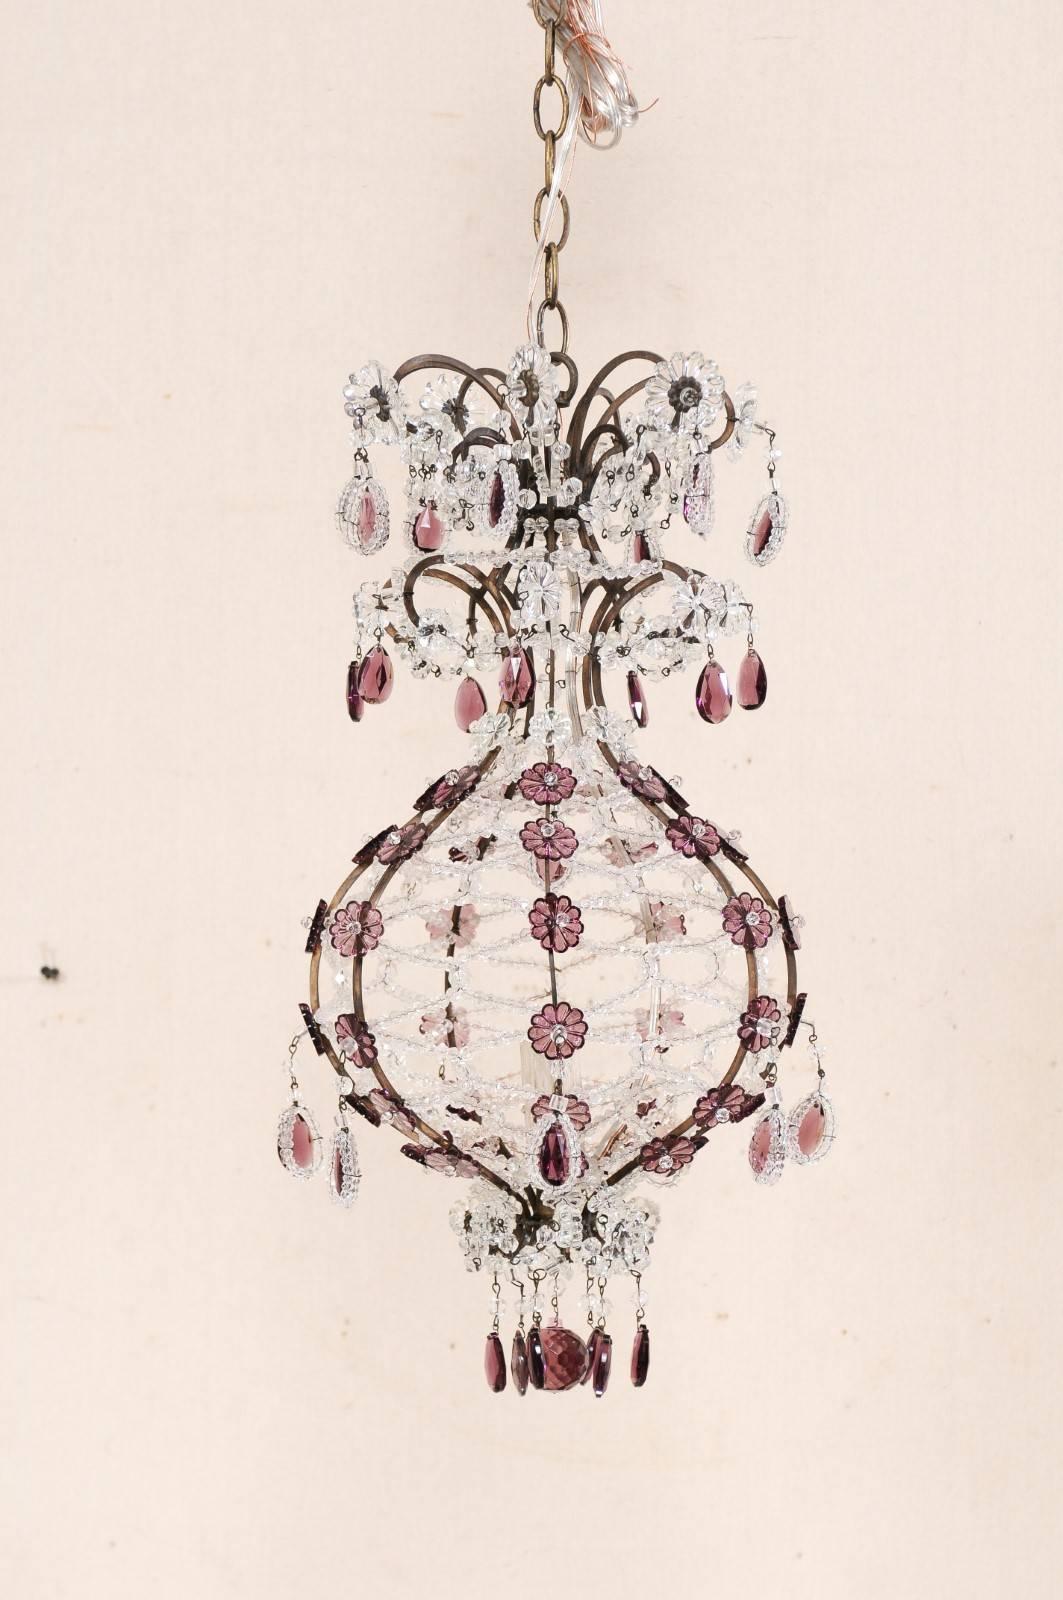 An Italian crystal and glass single-light chandelier from the mid-20th century. This vintage Italian chandelier features a clear and amethyst colored crystal and beaded glass decorated ballooned-shaped body, having a single light within its caged